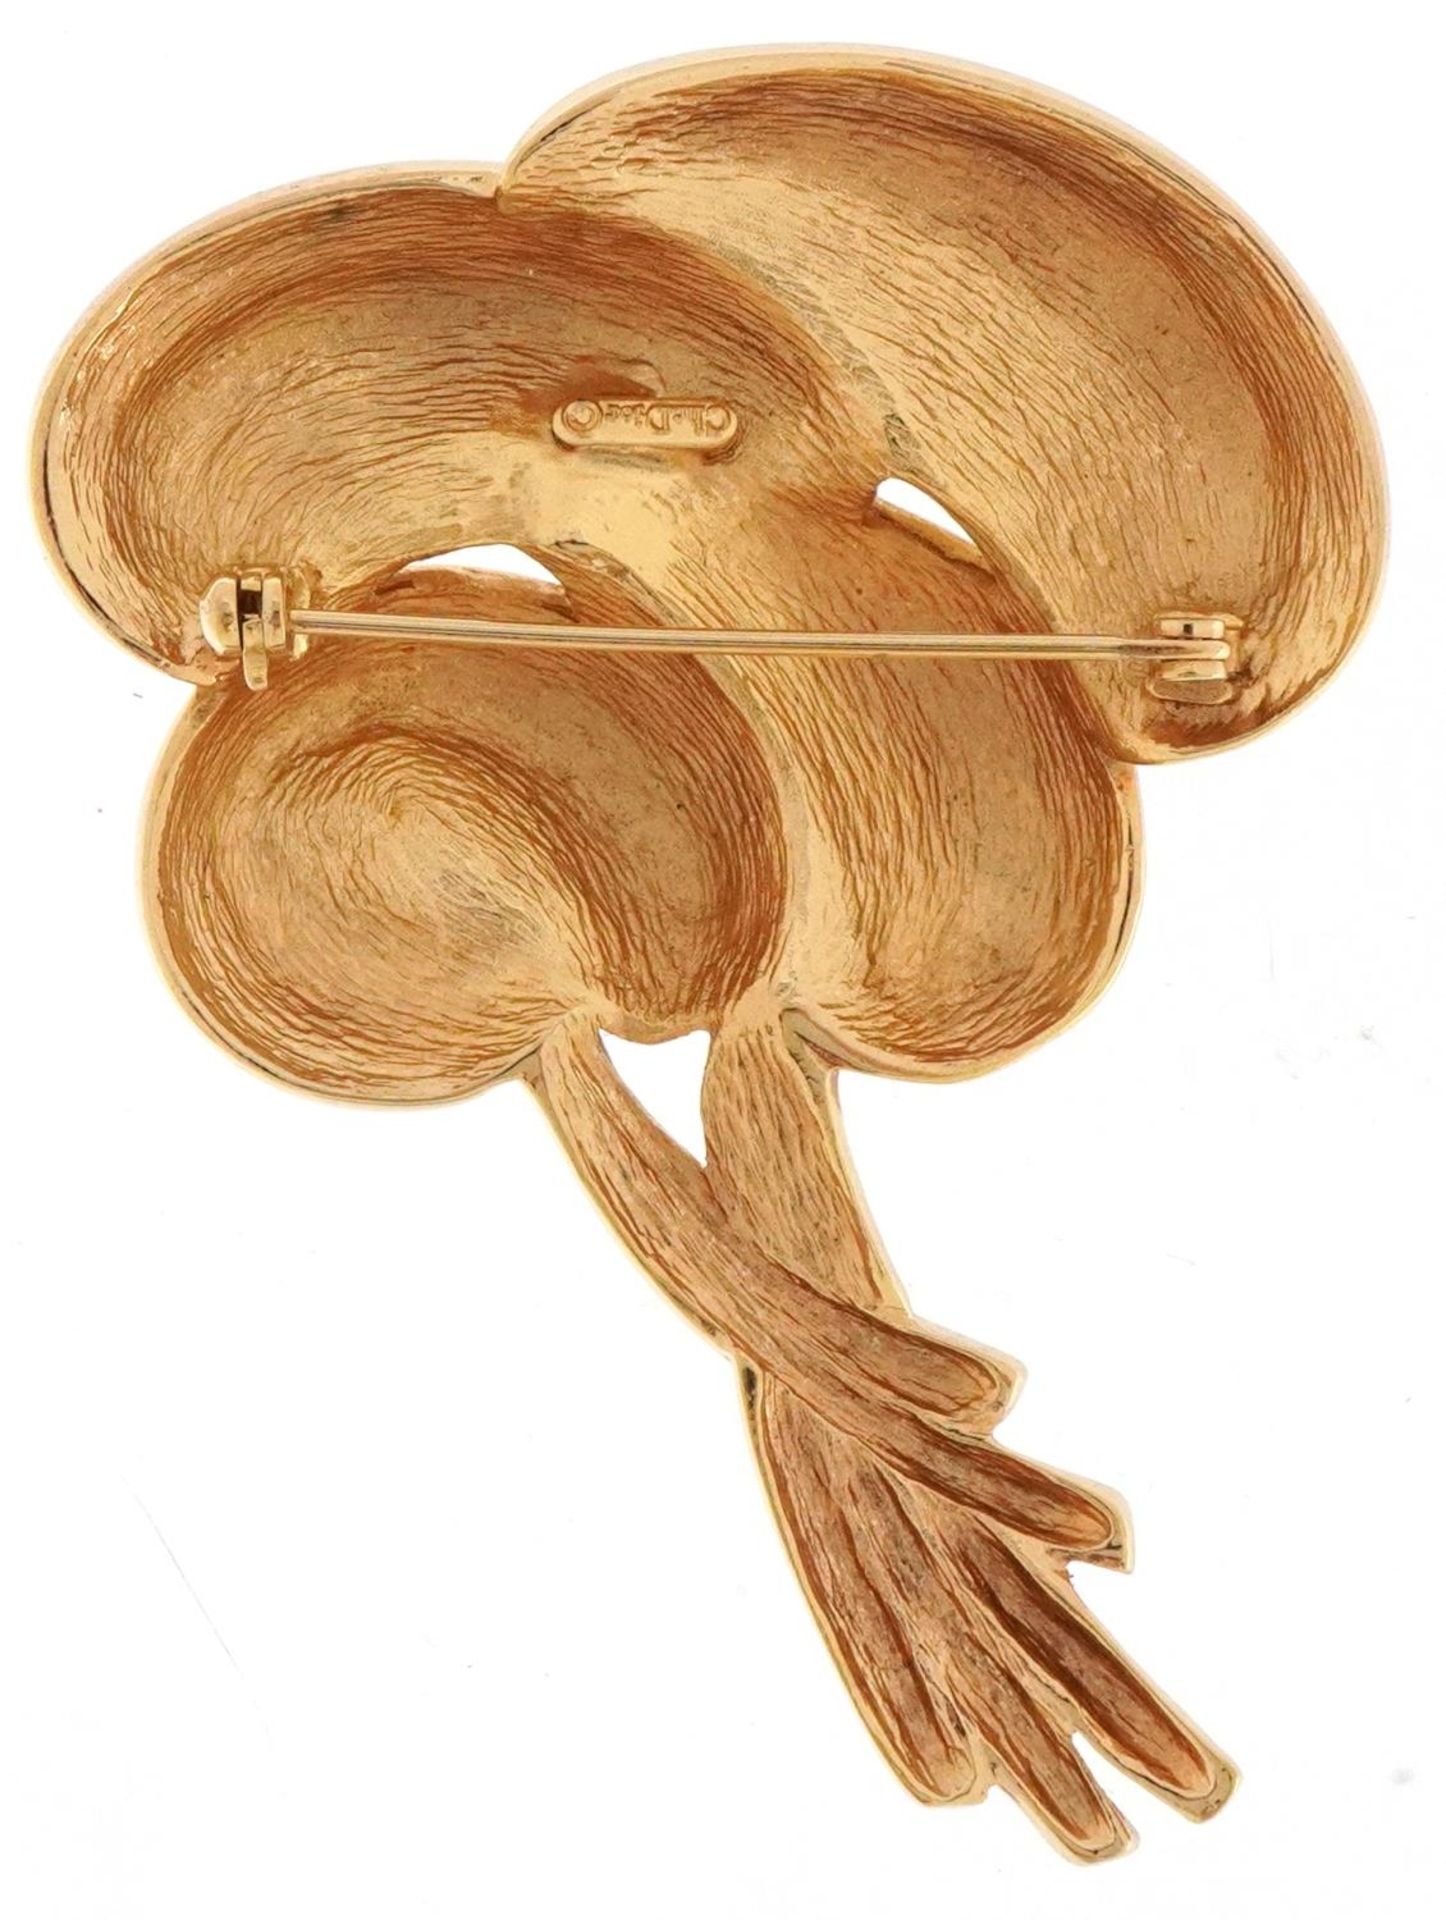 Christian Dior, gold plated and clear stone brooch in the form of palm leaves, 6.5cm high, 30.0g - Image 2 of 3